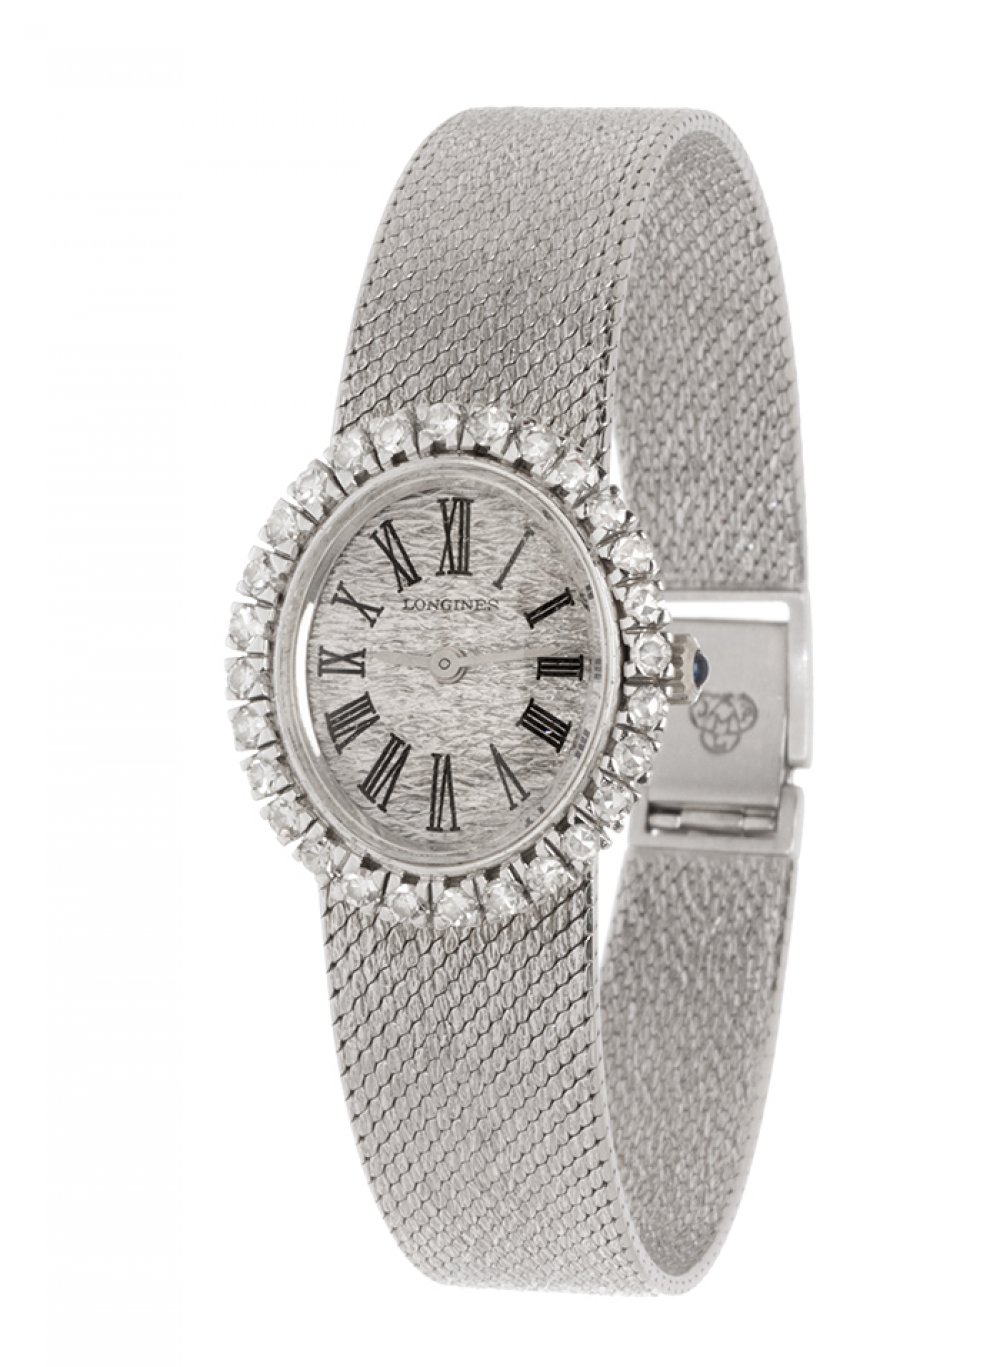 LONGINES ladies' watch, 1970s.In 18kt white gold. Oval case with satin-finished dial engraved in the